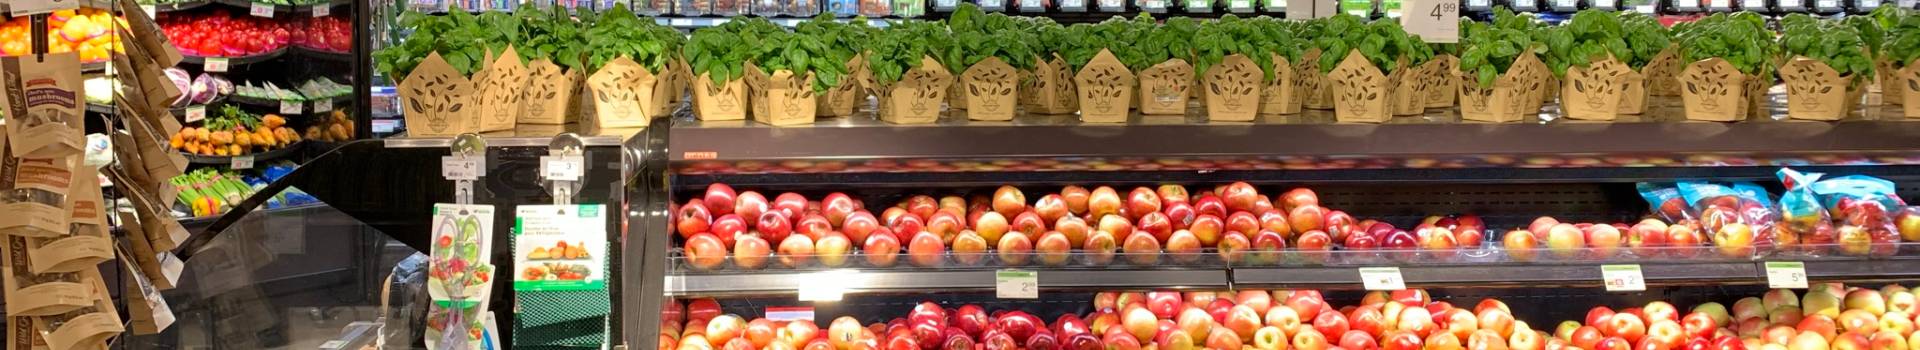 An image showing fresh apples and Plants in the grocery store